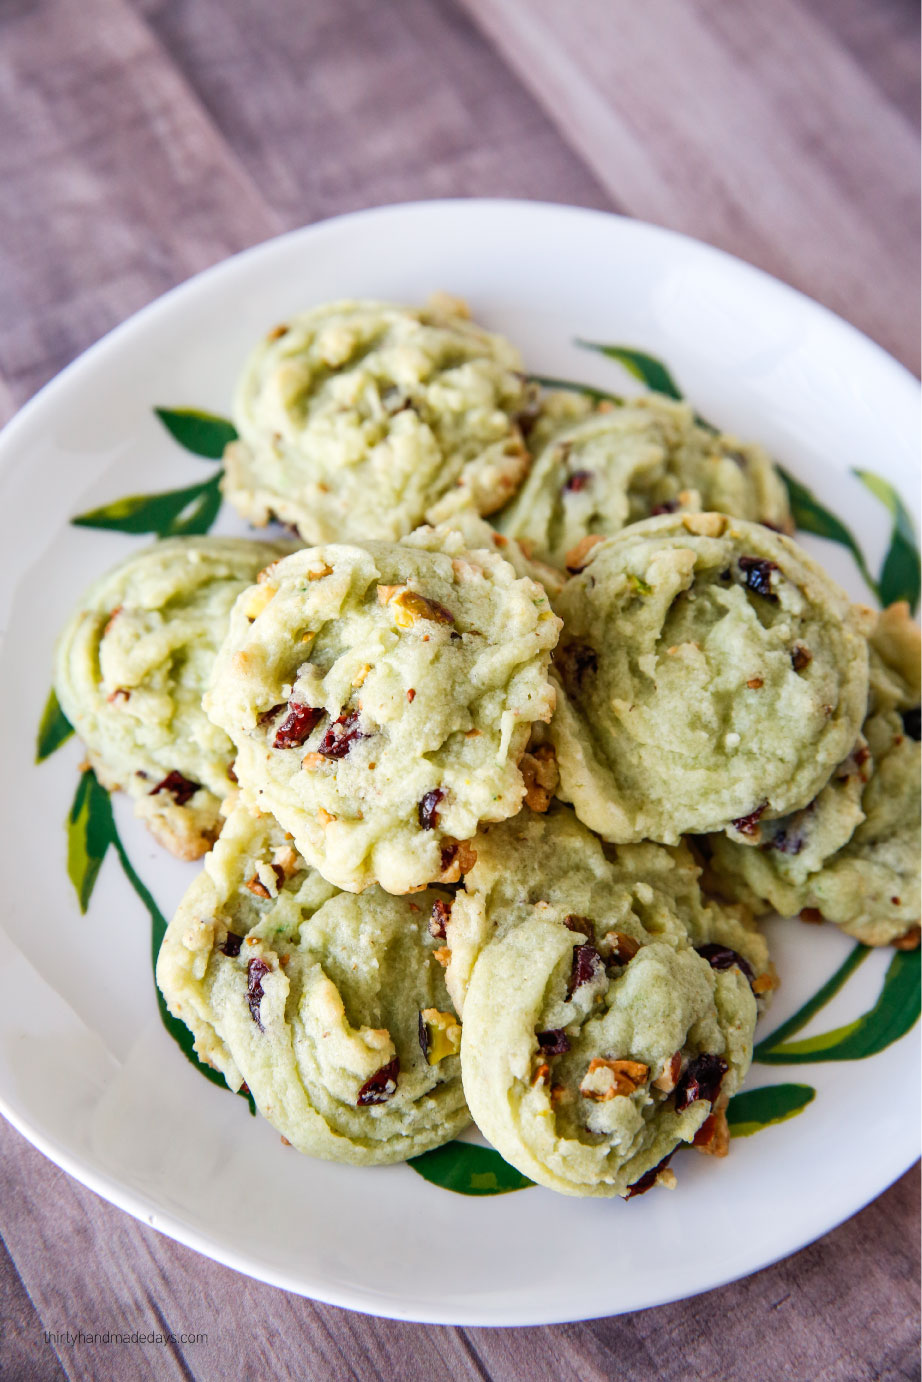 Holidays: Amazing Christmas Cookies that are super easy to make. We love these Cranberry Pistachio Cookies so much! from www.thirtyhandmadedays.com